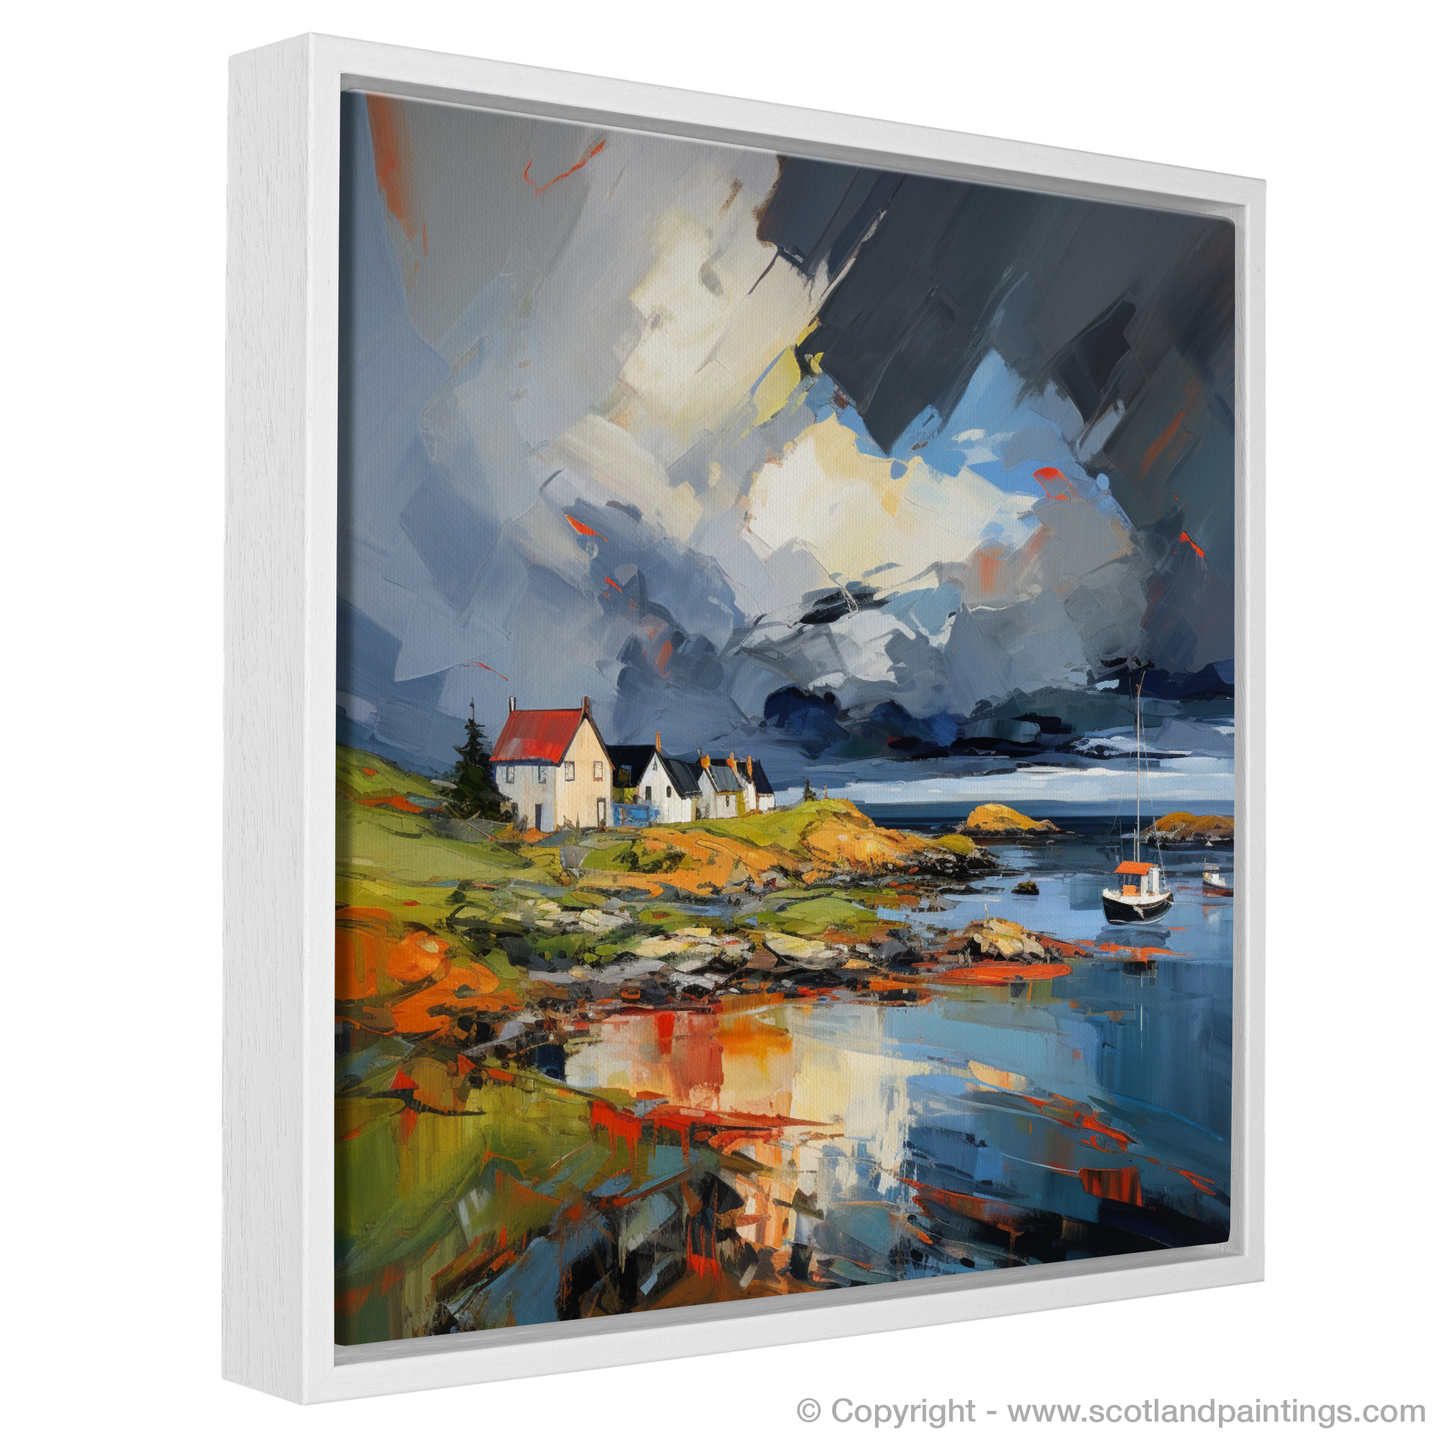 Painting and Art Print of Gairloch Harbour with a stormy sky entitled "Stormy Skies over Gairloch Harbour".